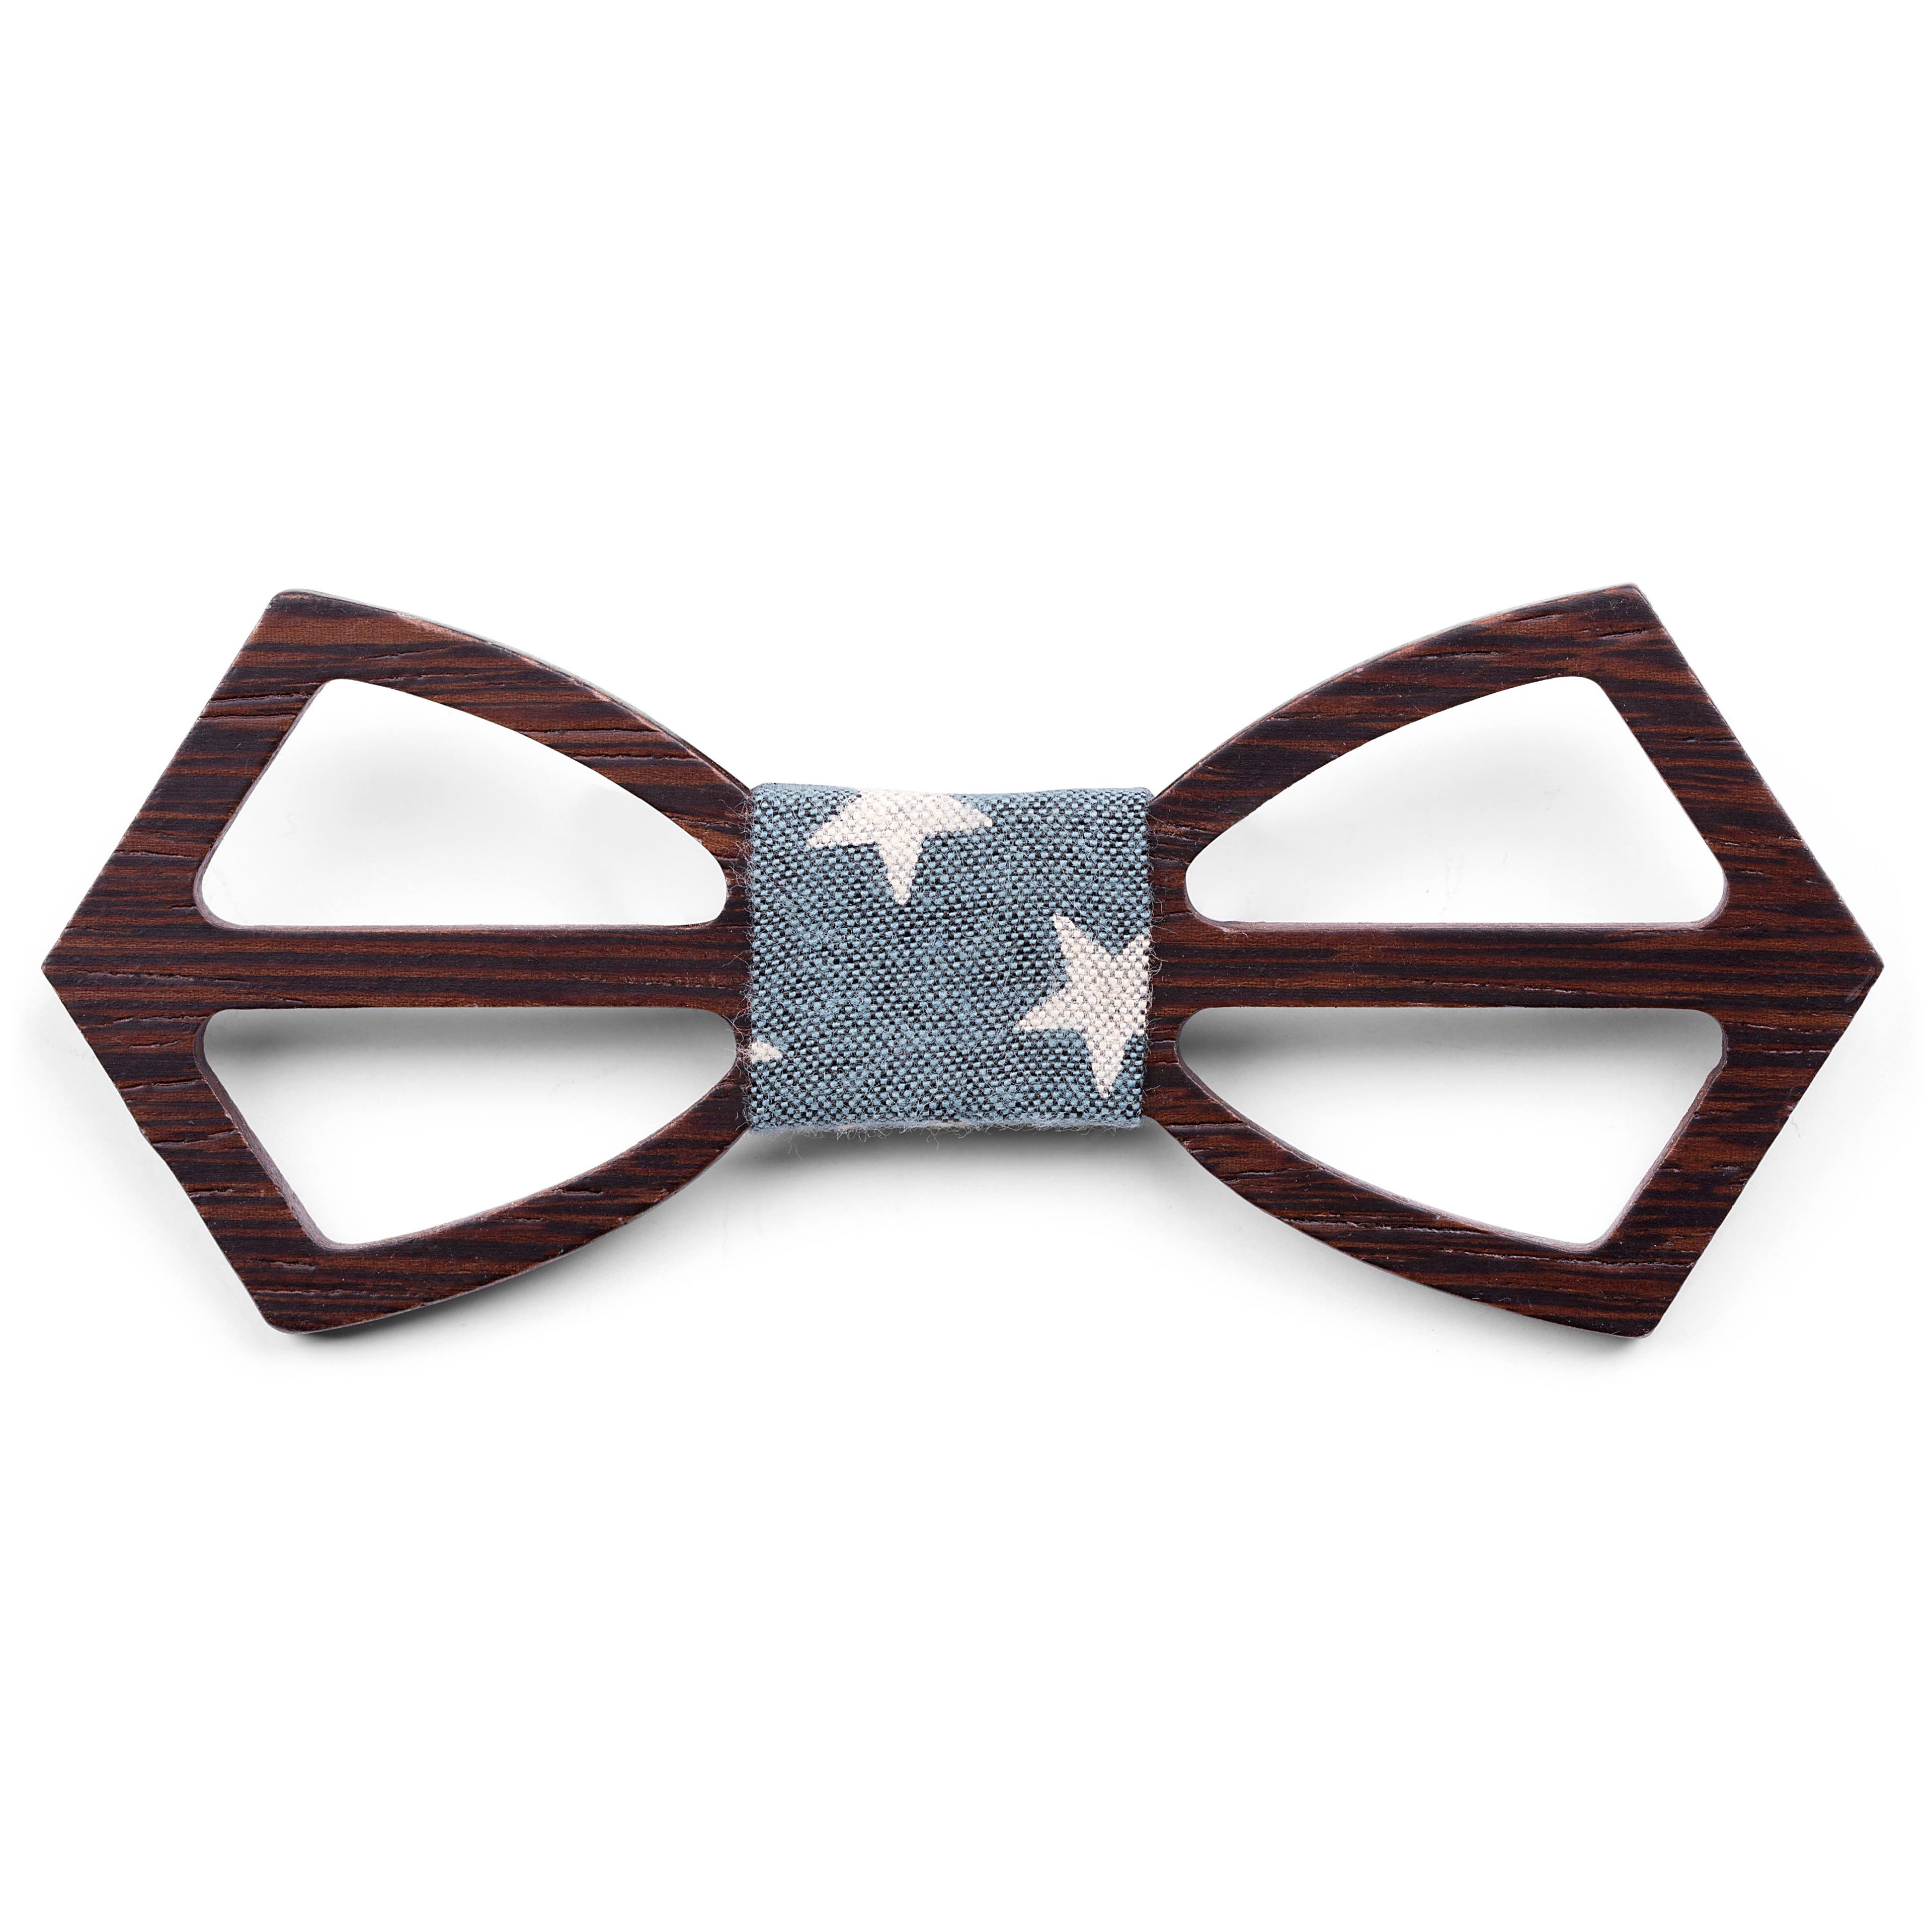 California Wenge Wood Bow Tie with Sky Blue & White Stars Fabric Detail